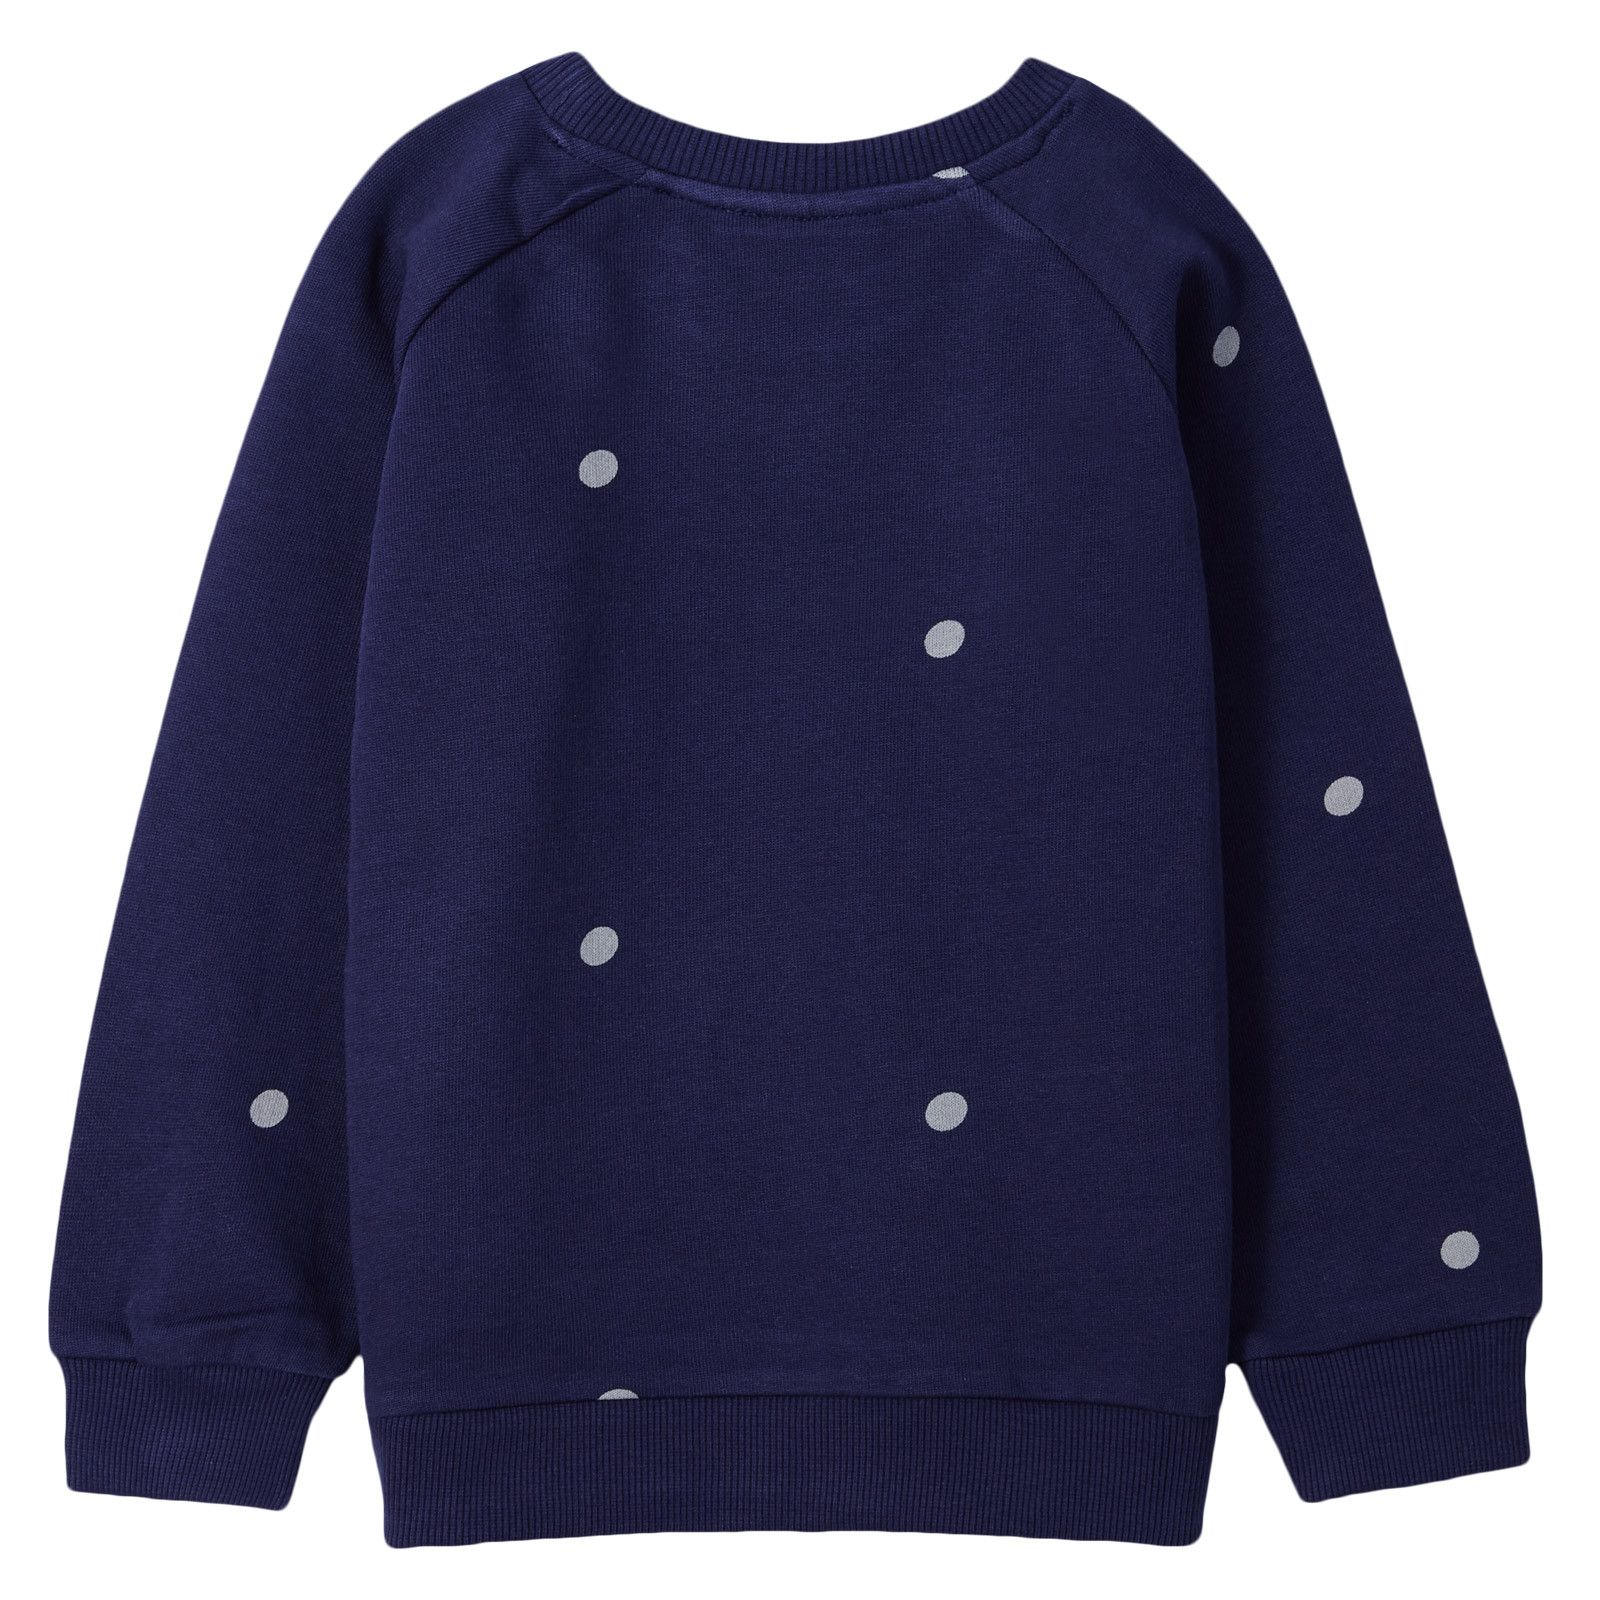 Boys&Girls Navy Blue Sweater With White Speck - CÉMAROSE | Children's Fashion Store - 2